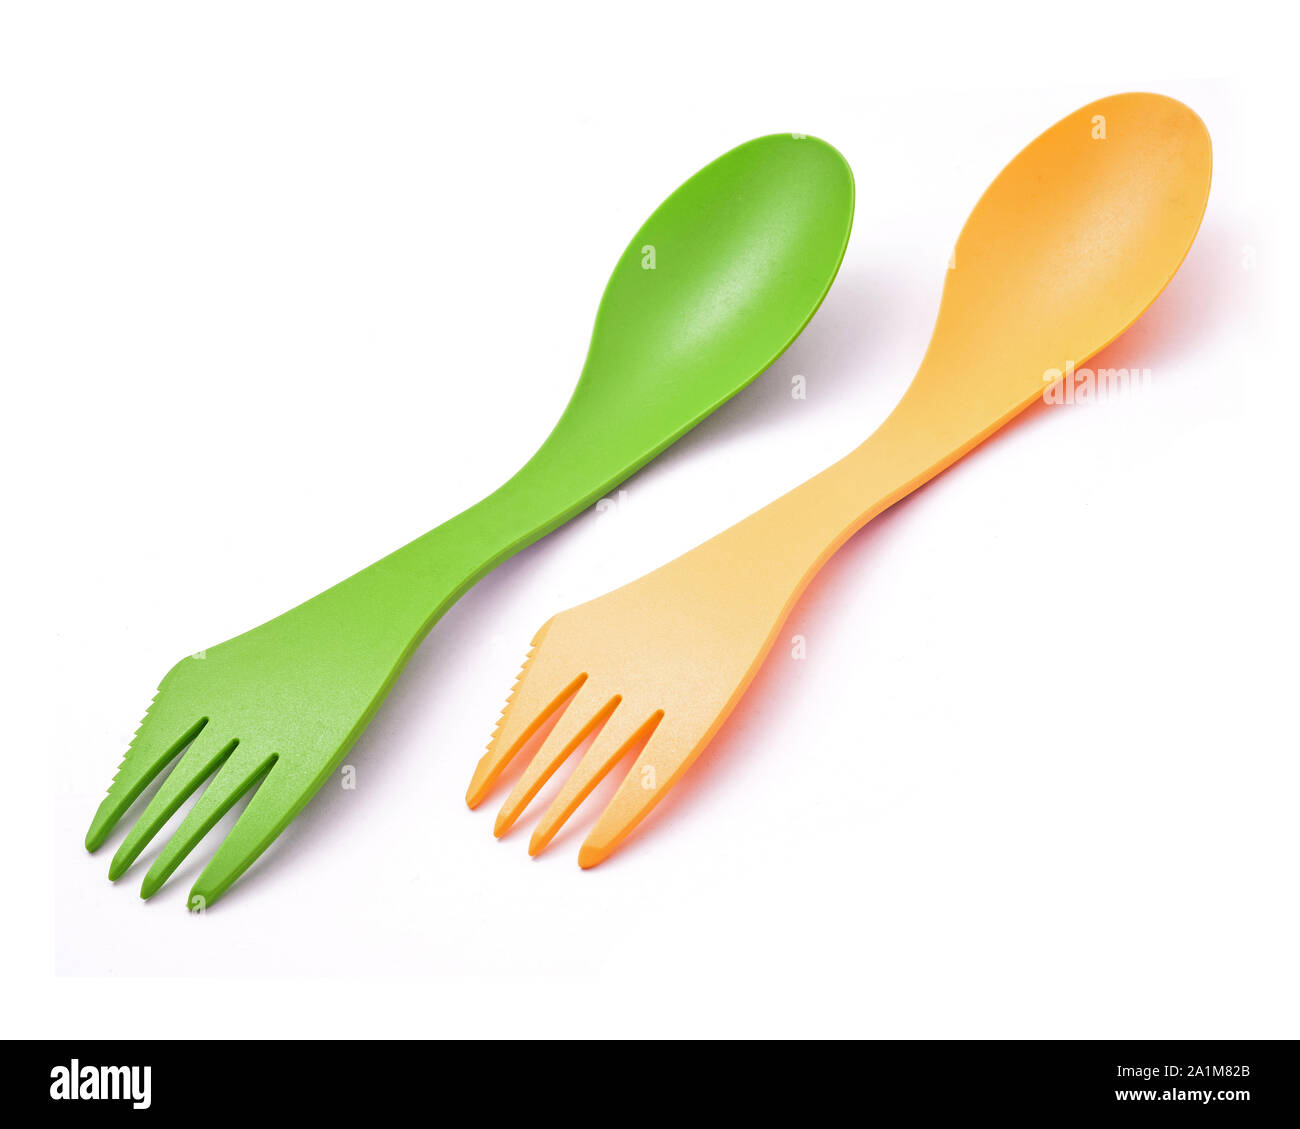 camping spoon and fork tools isolated on white background Stock Photo